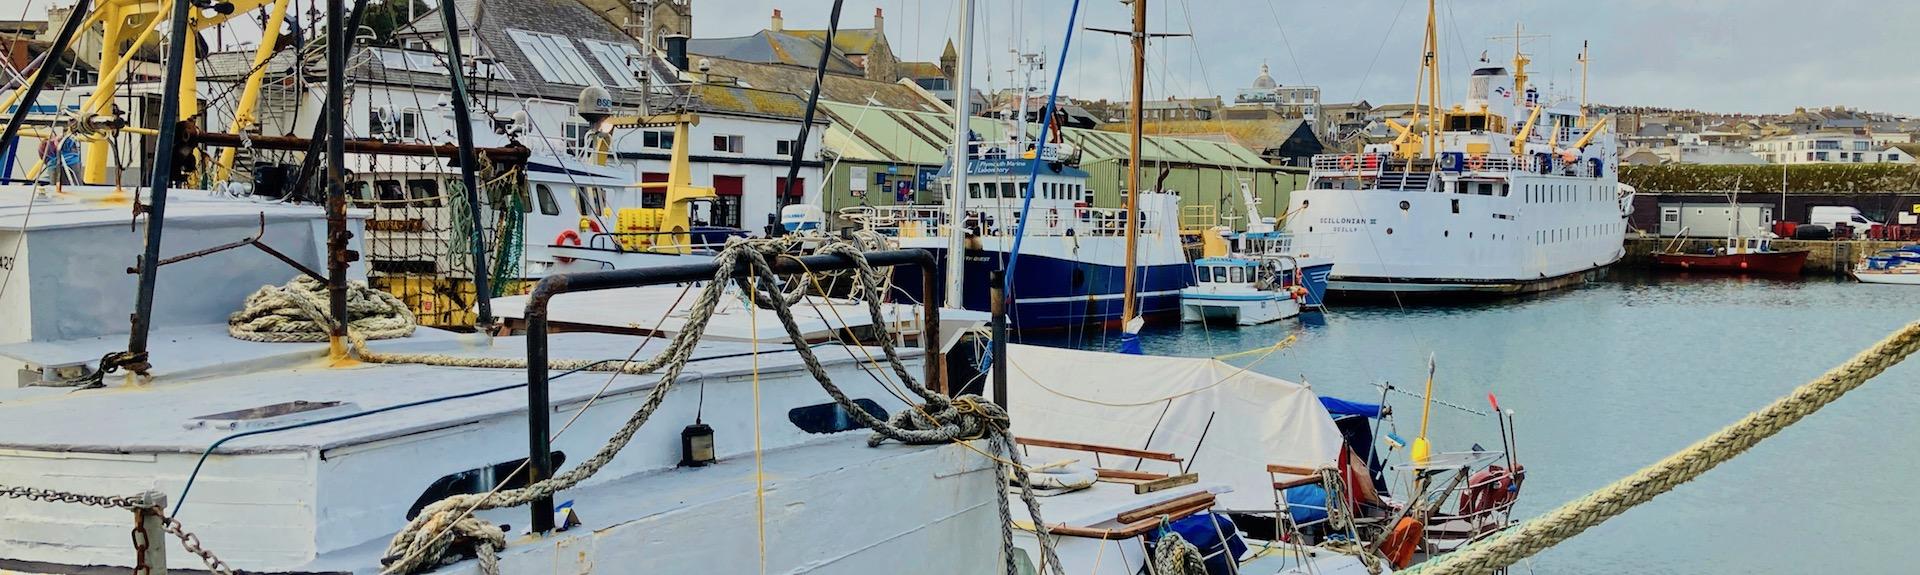 Enjoy a walk inspecting the boats moored in Penzance Harbour 